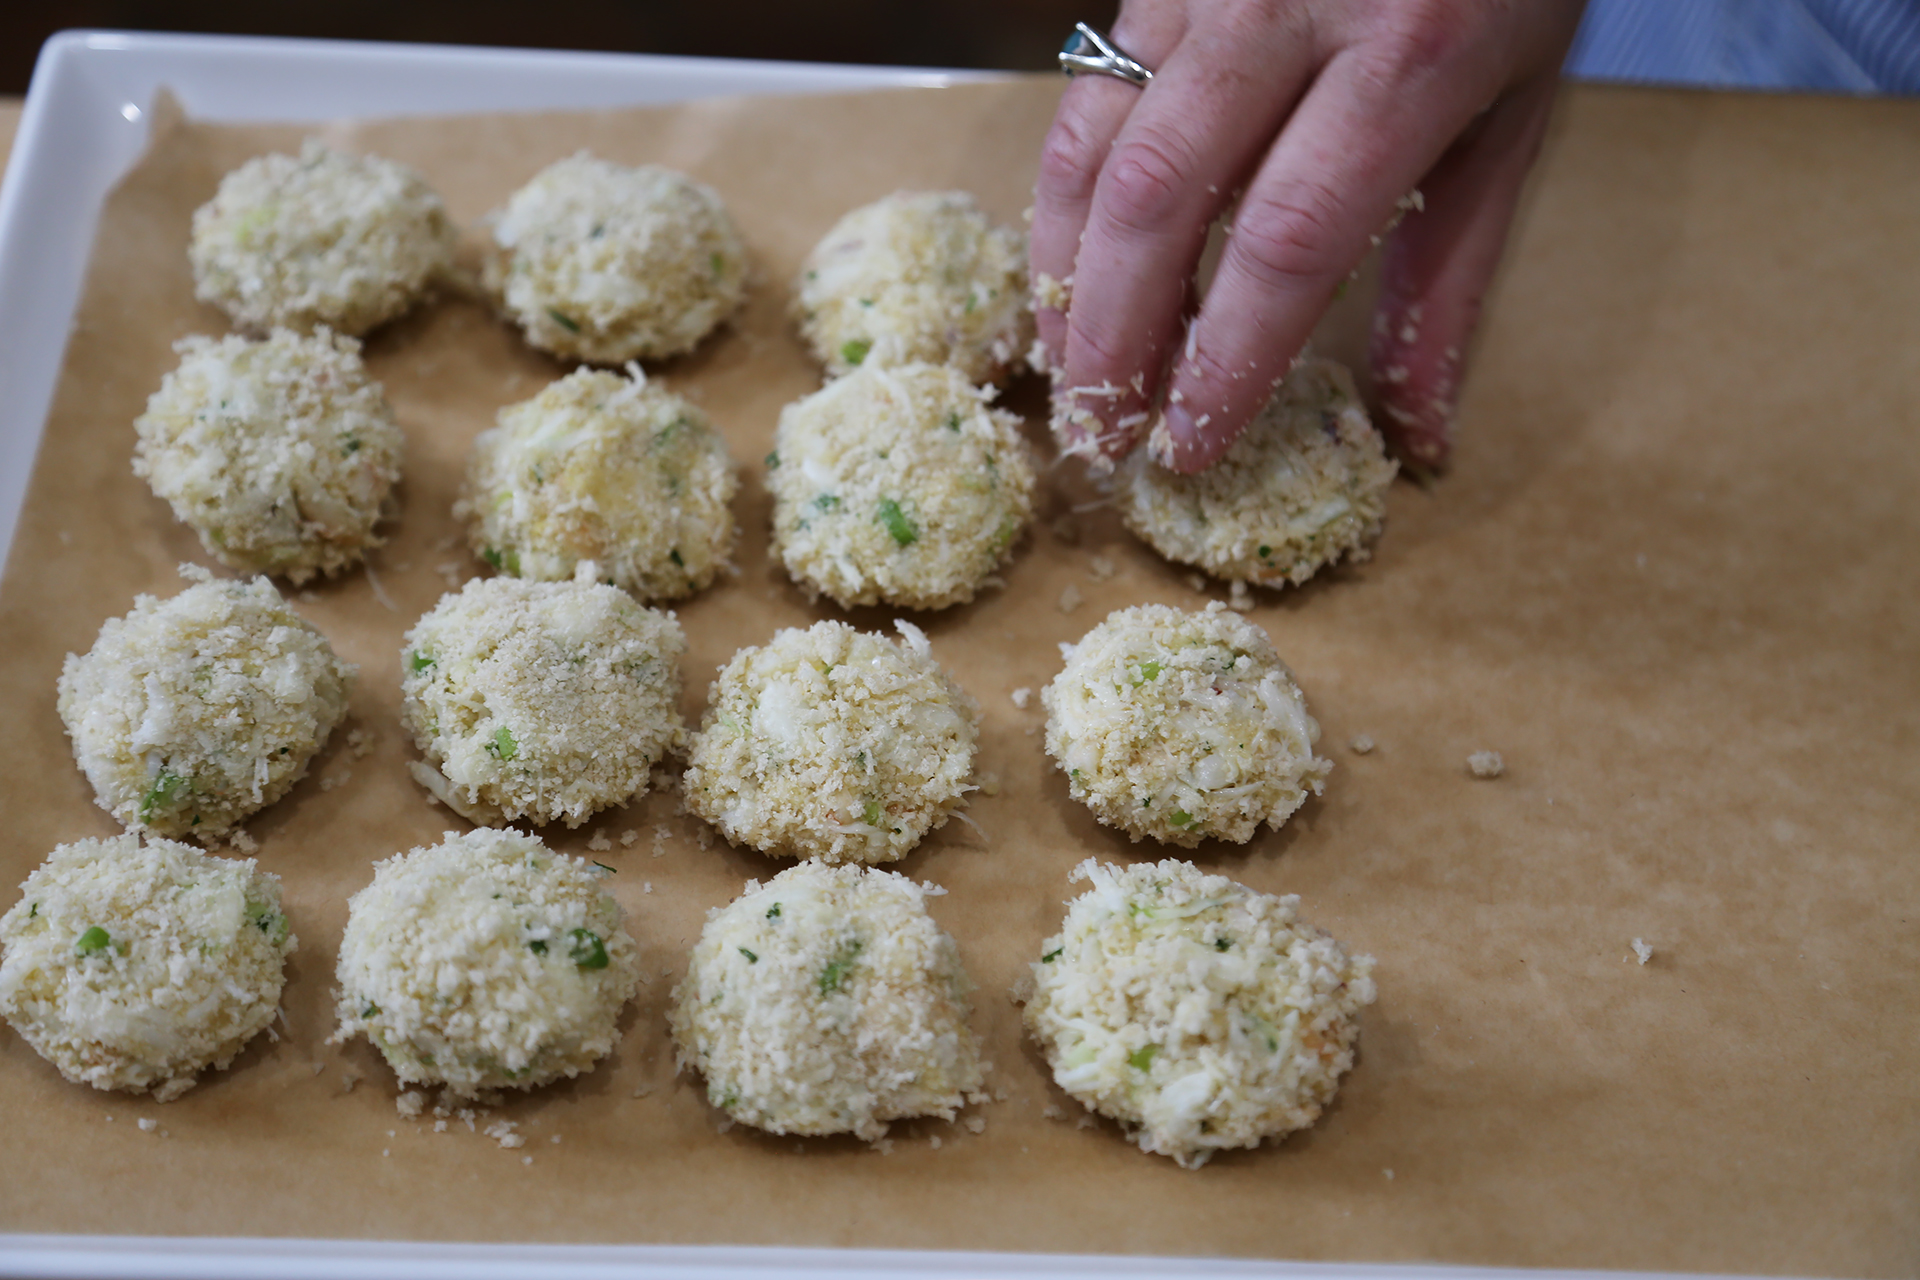 Form into approximately 40 mini crab cakes, each about 1 tablespoonful, pressing them together to hold.